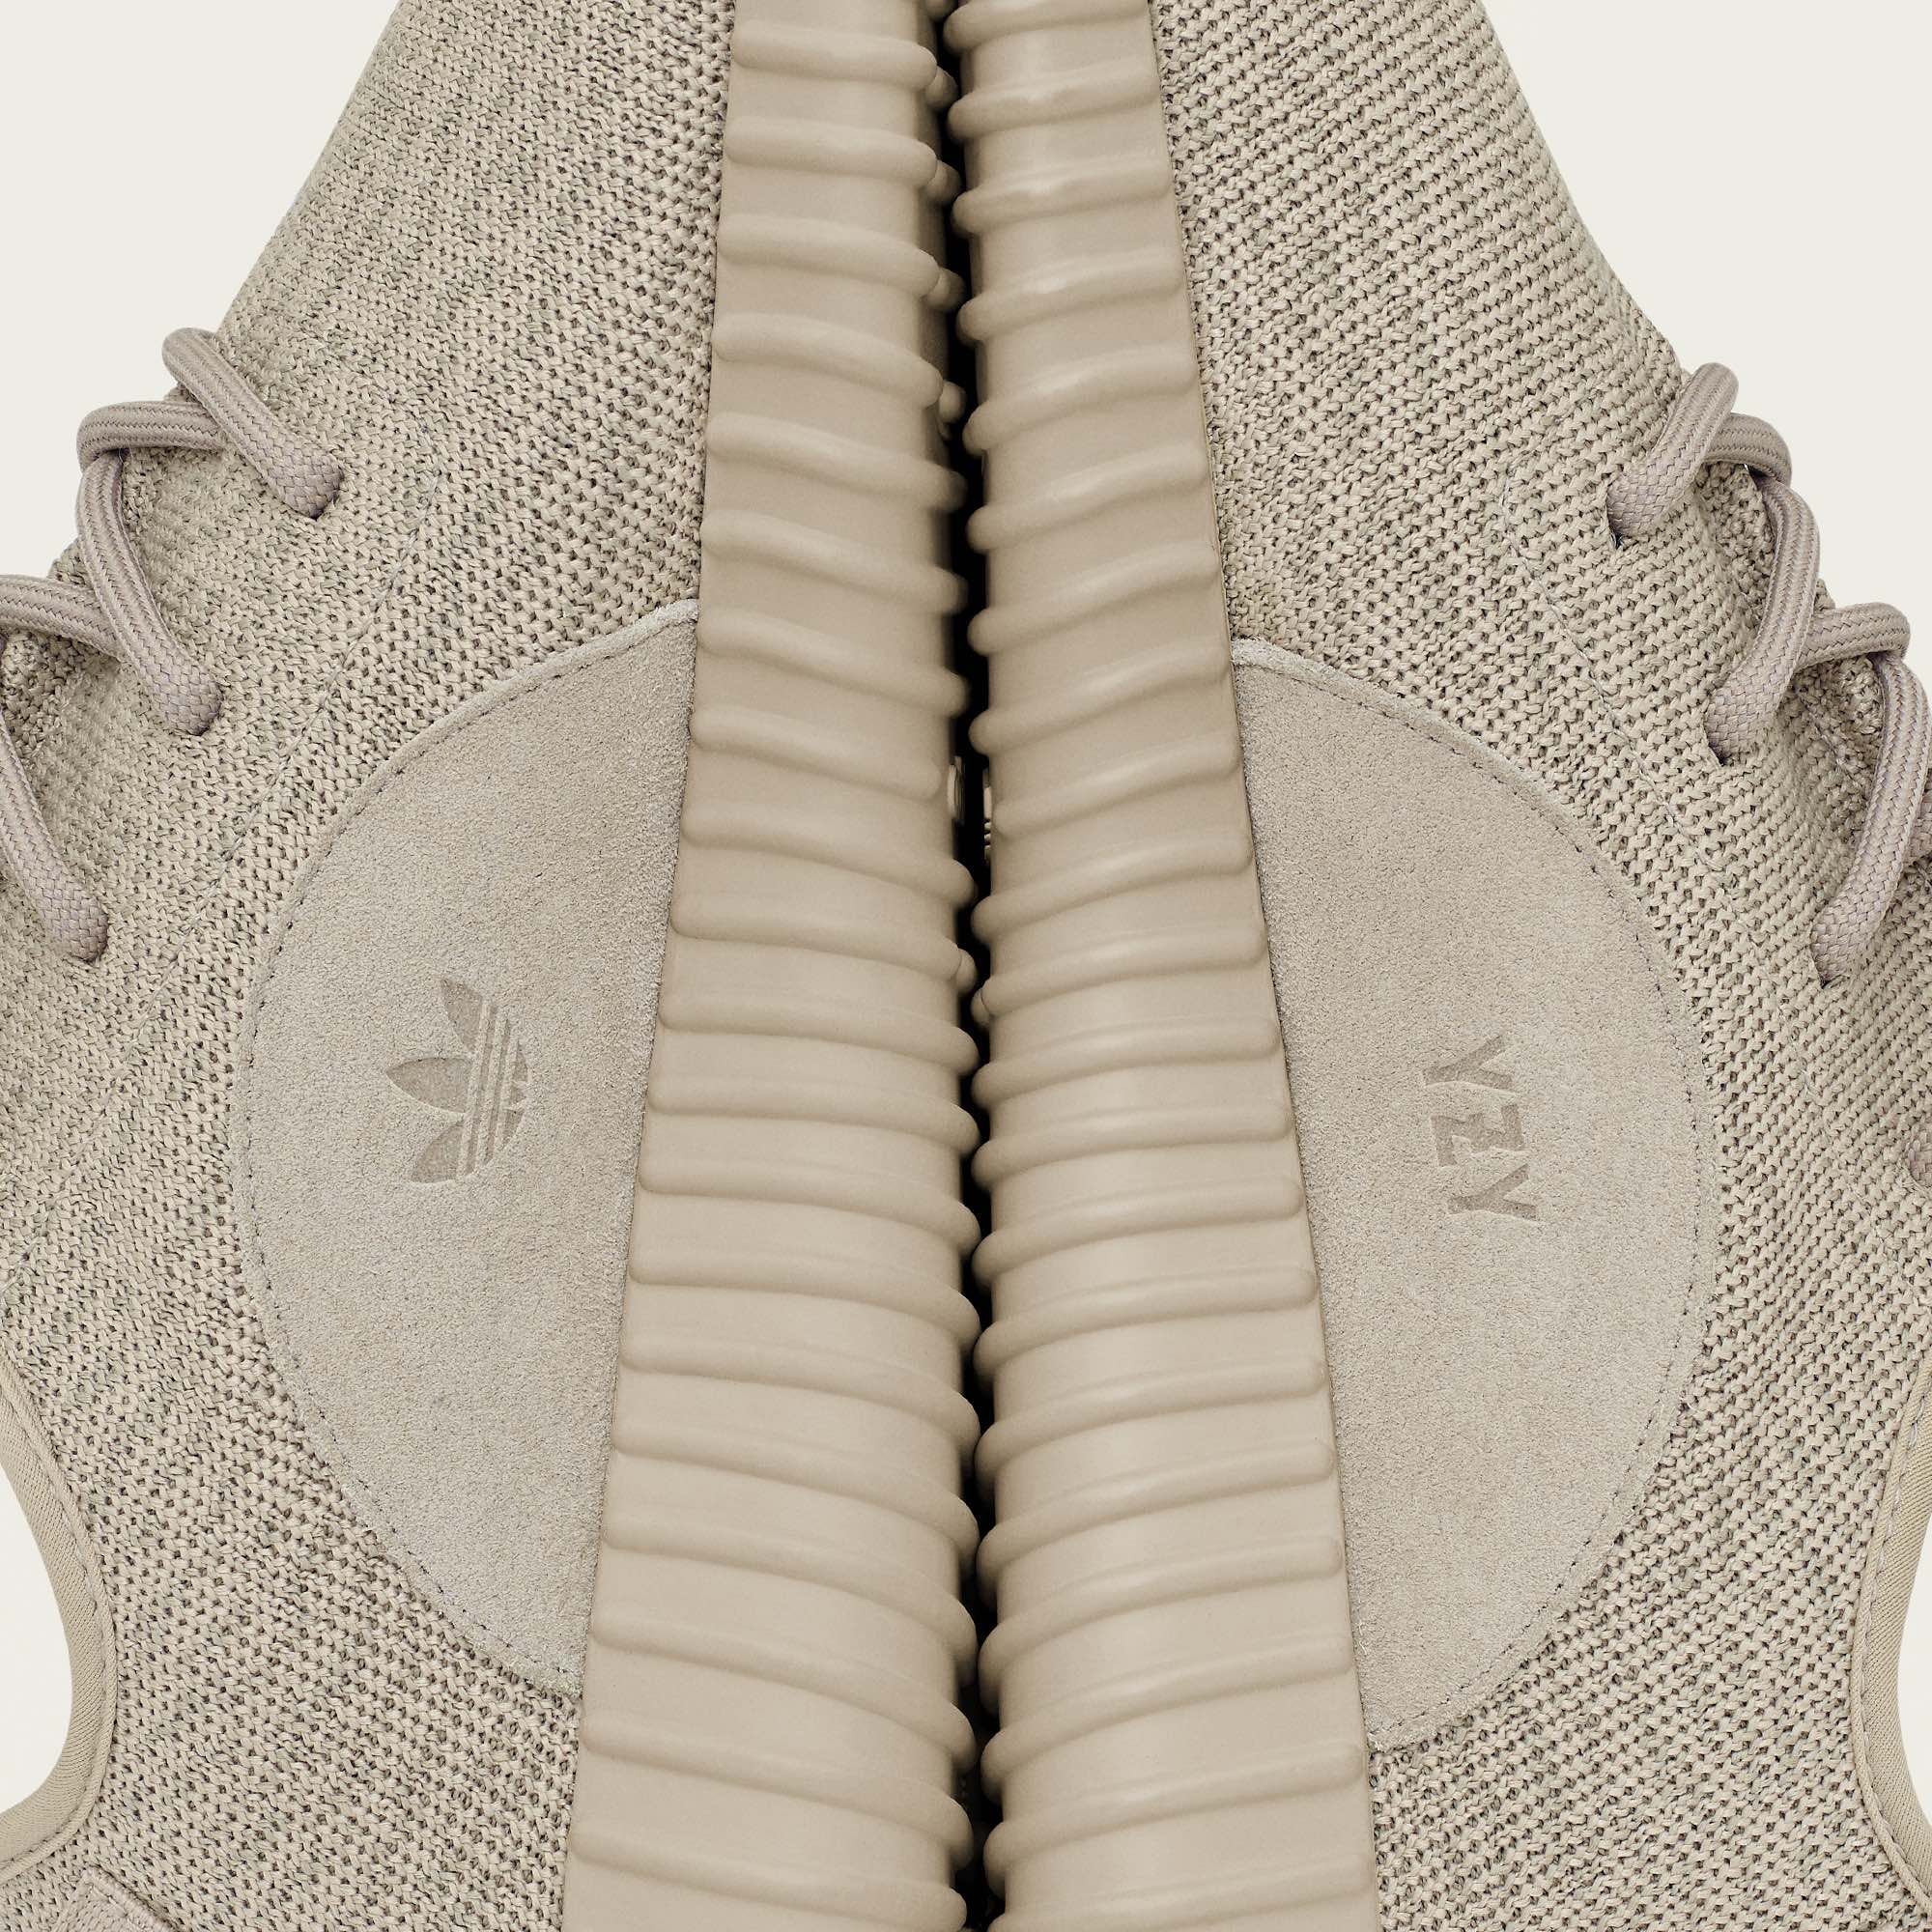 champs shoe store yeezy